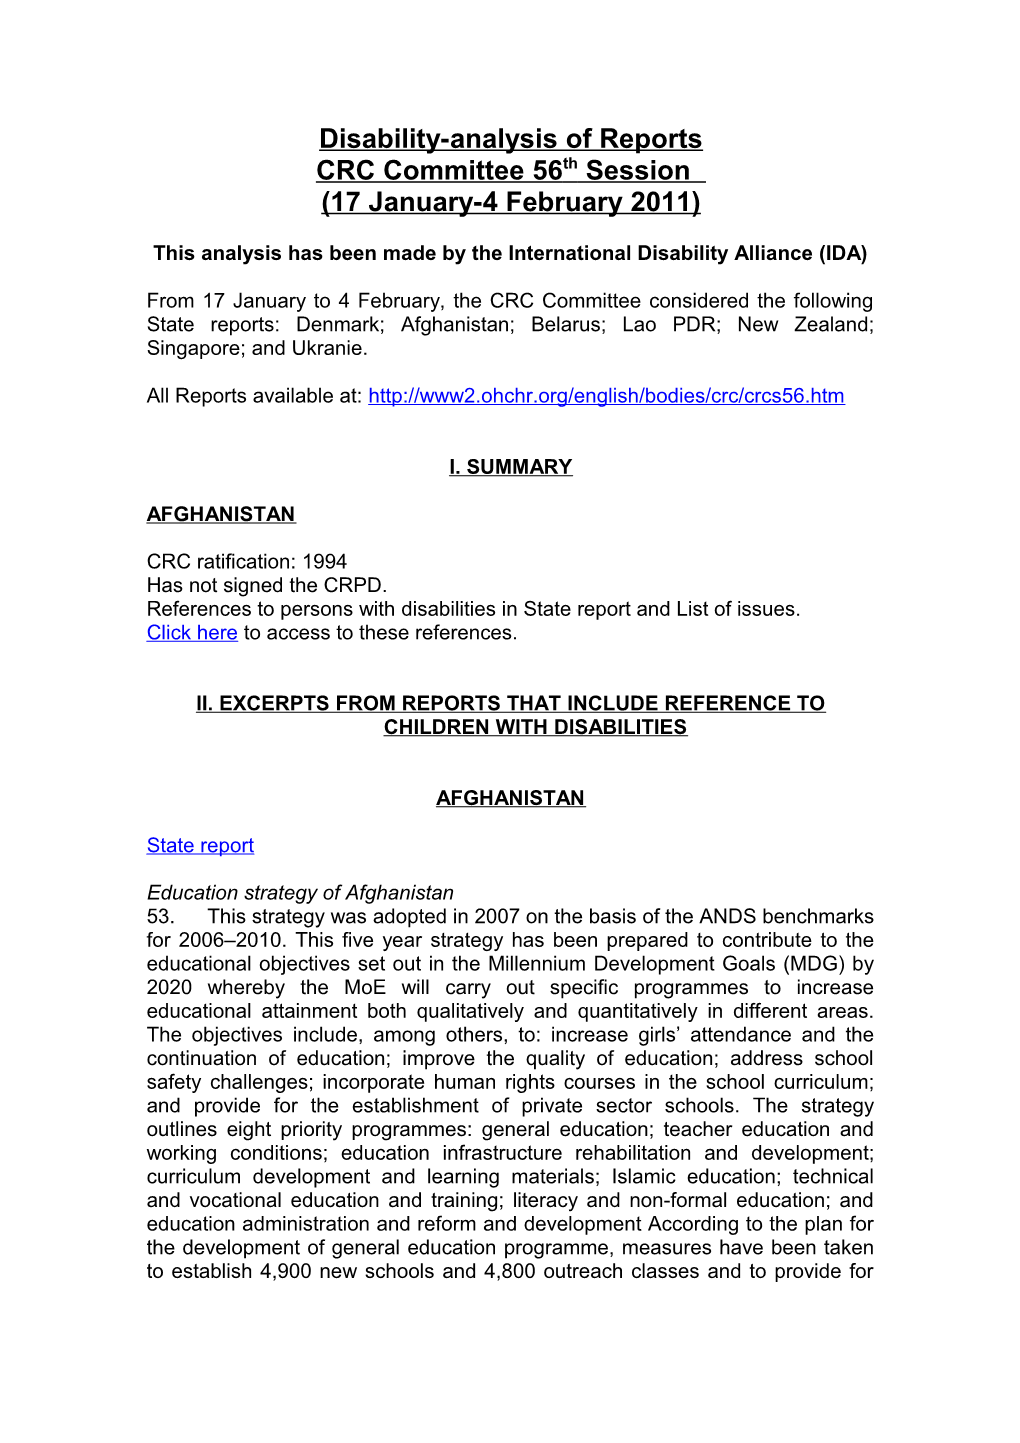 Disability-Analysis of Concluding Observations Of